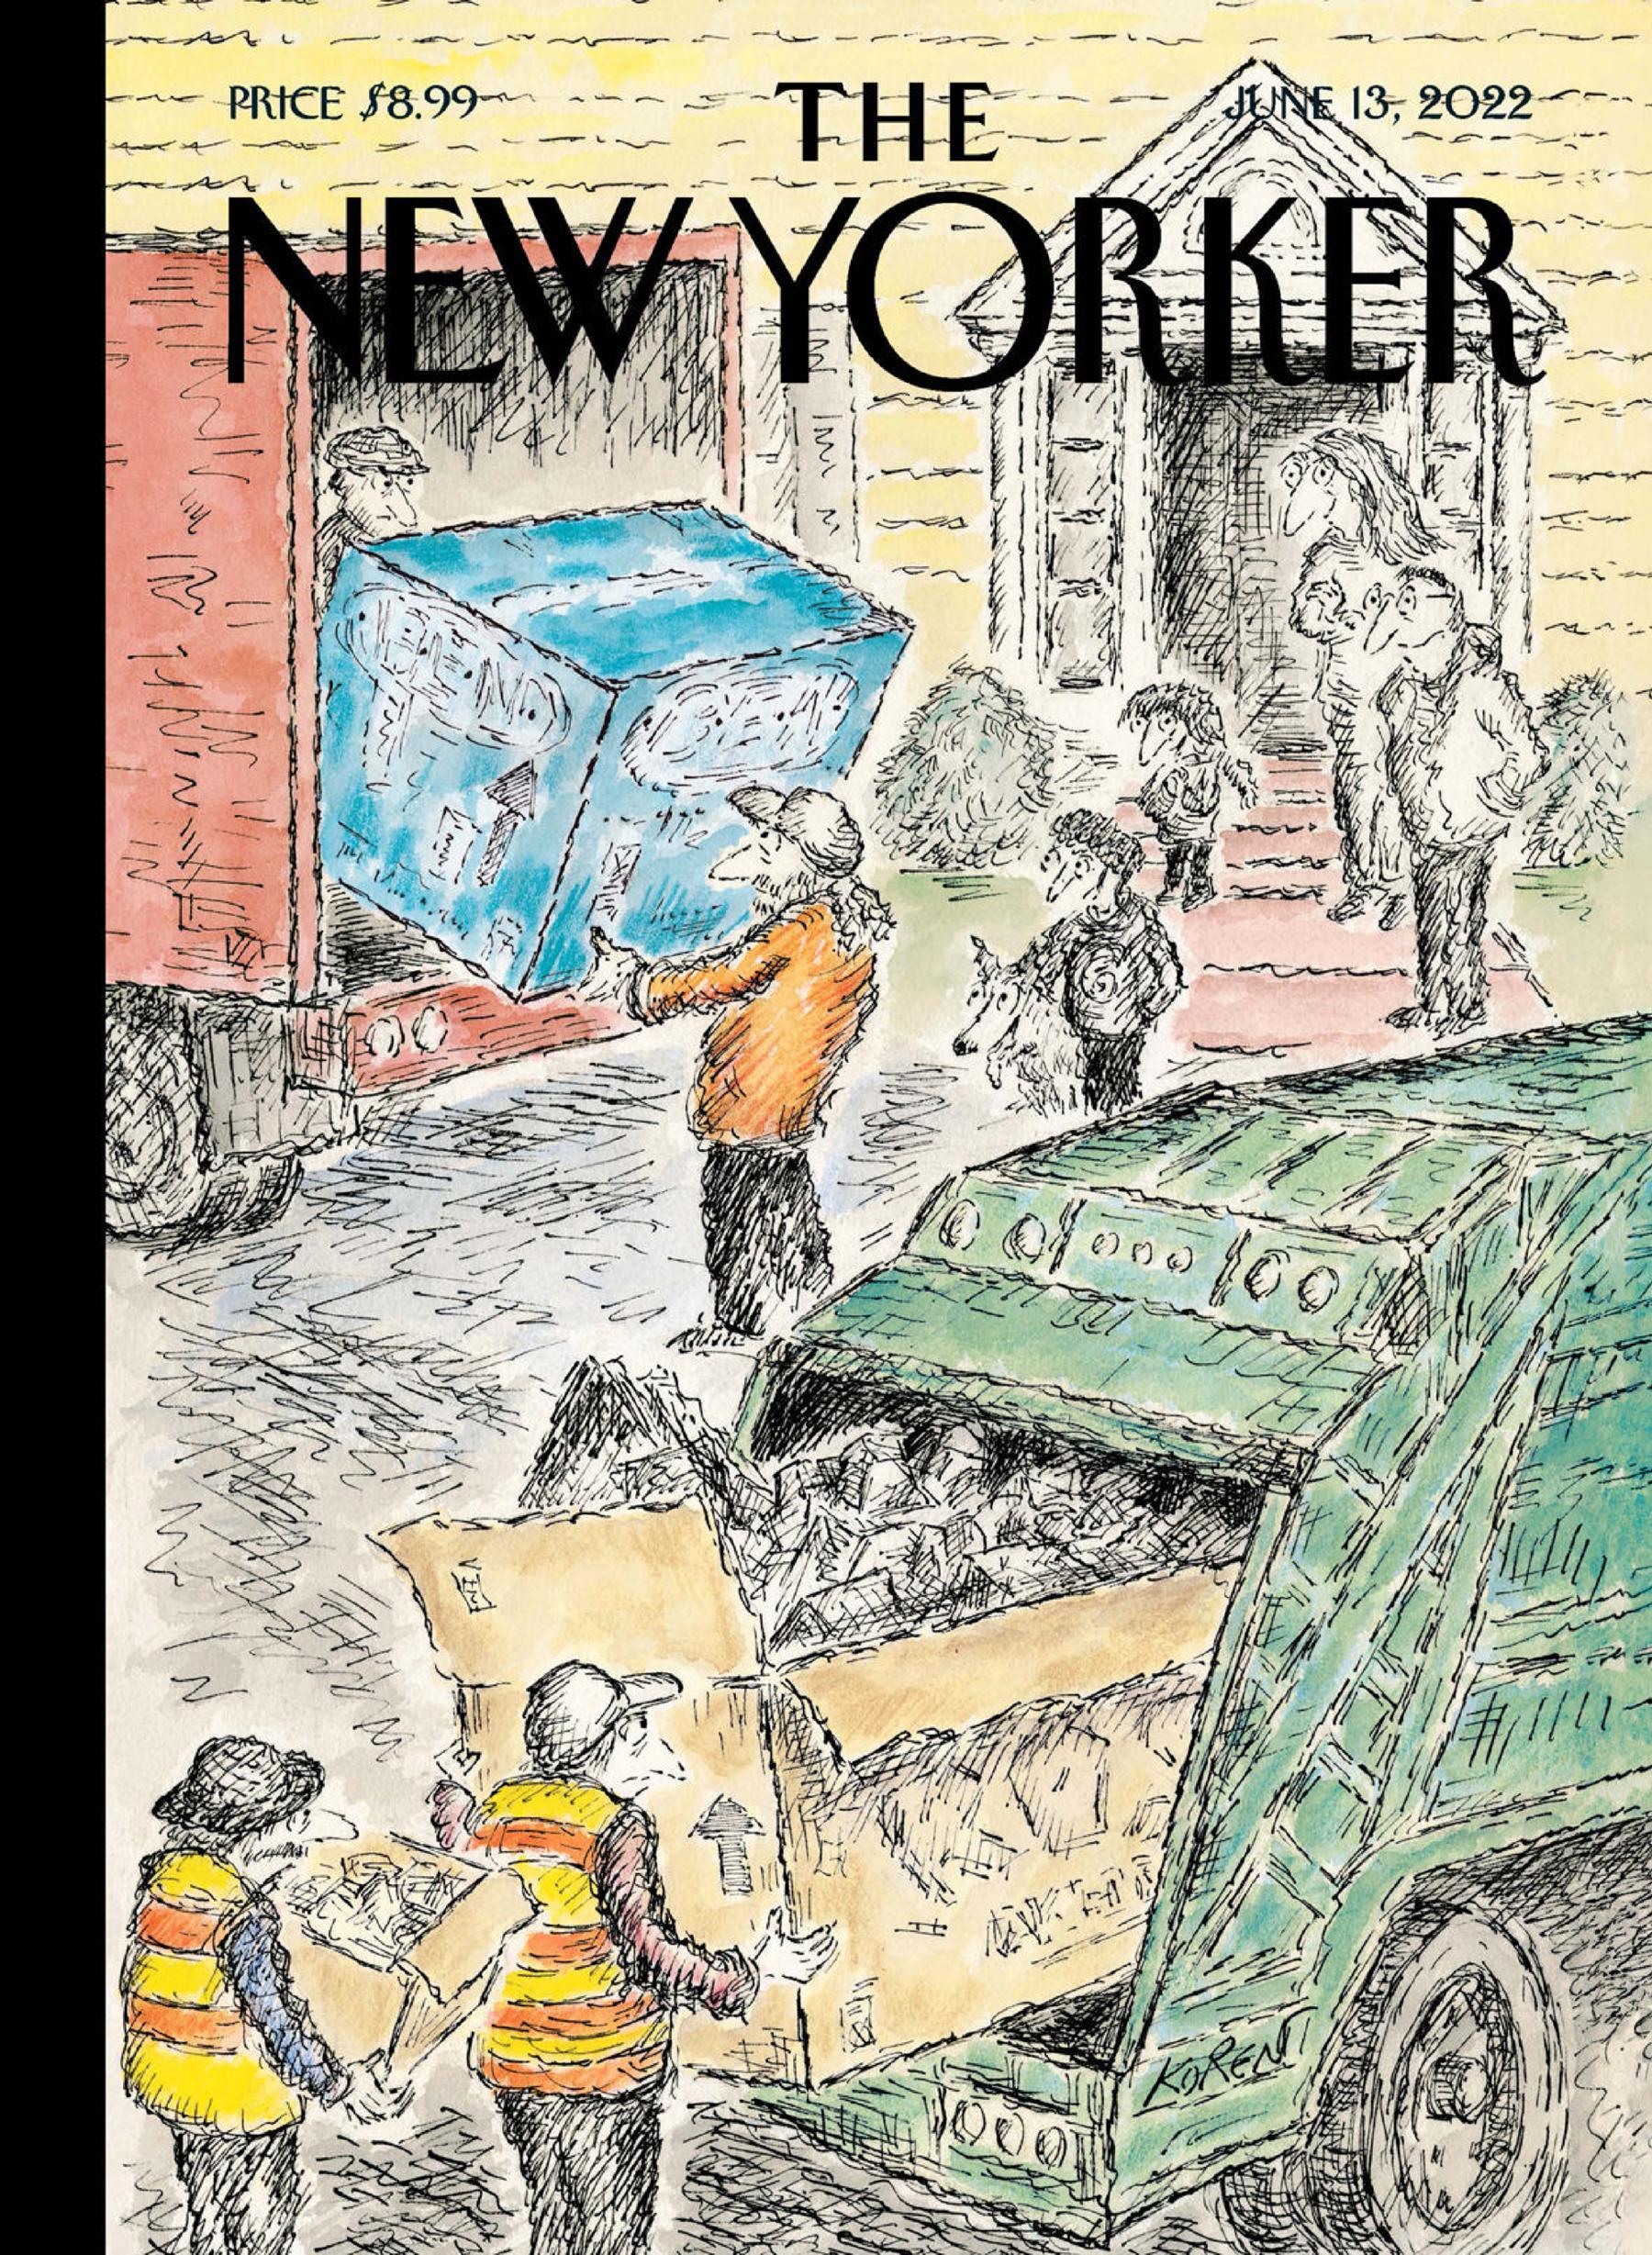 The New Yorker – June 13, 2022